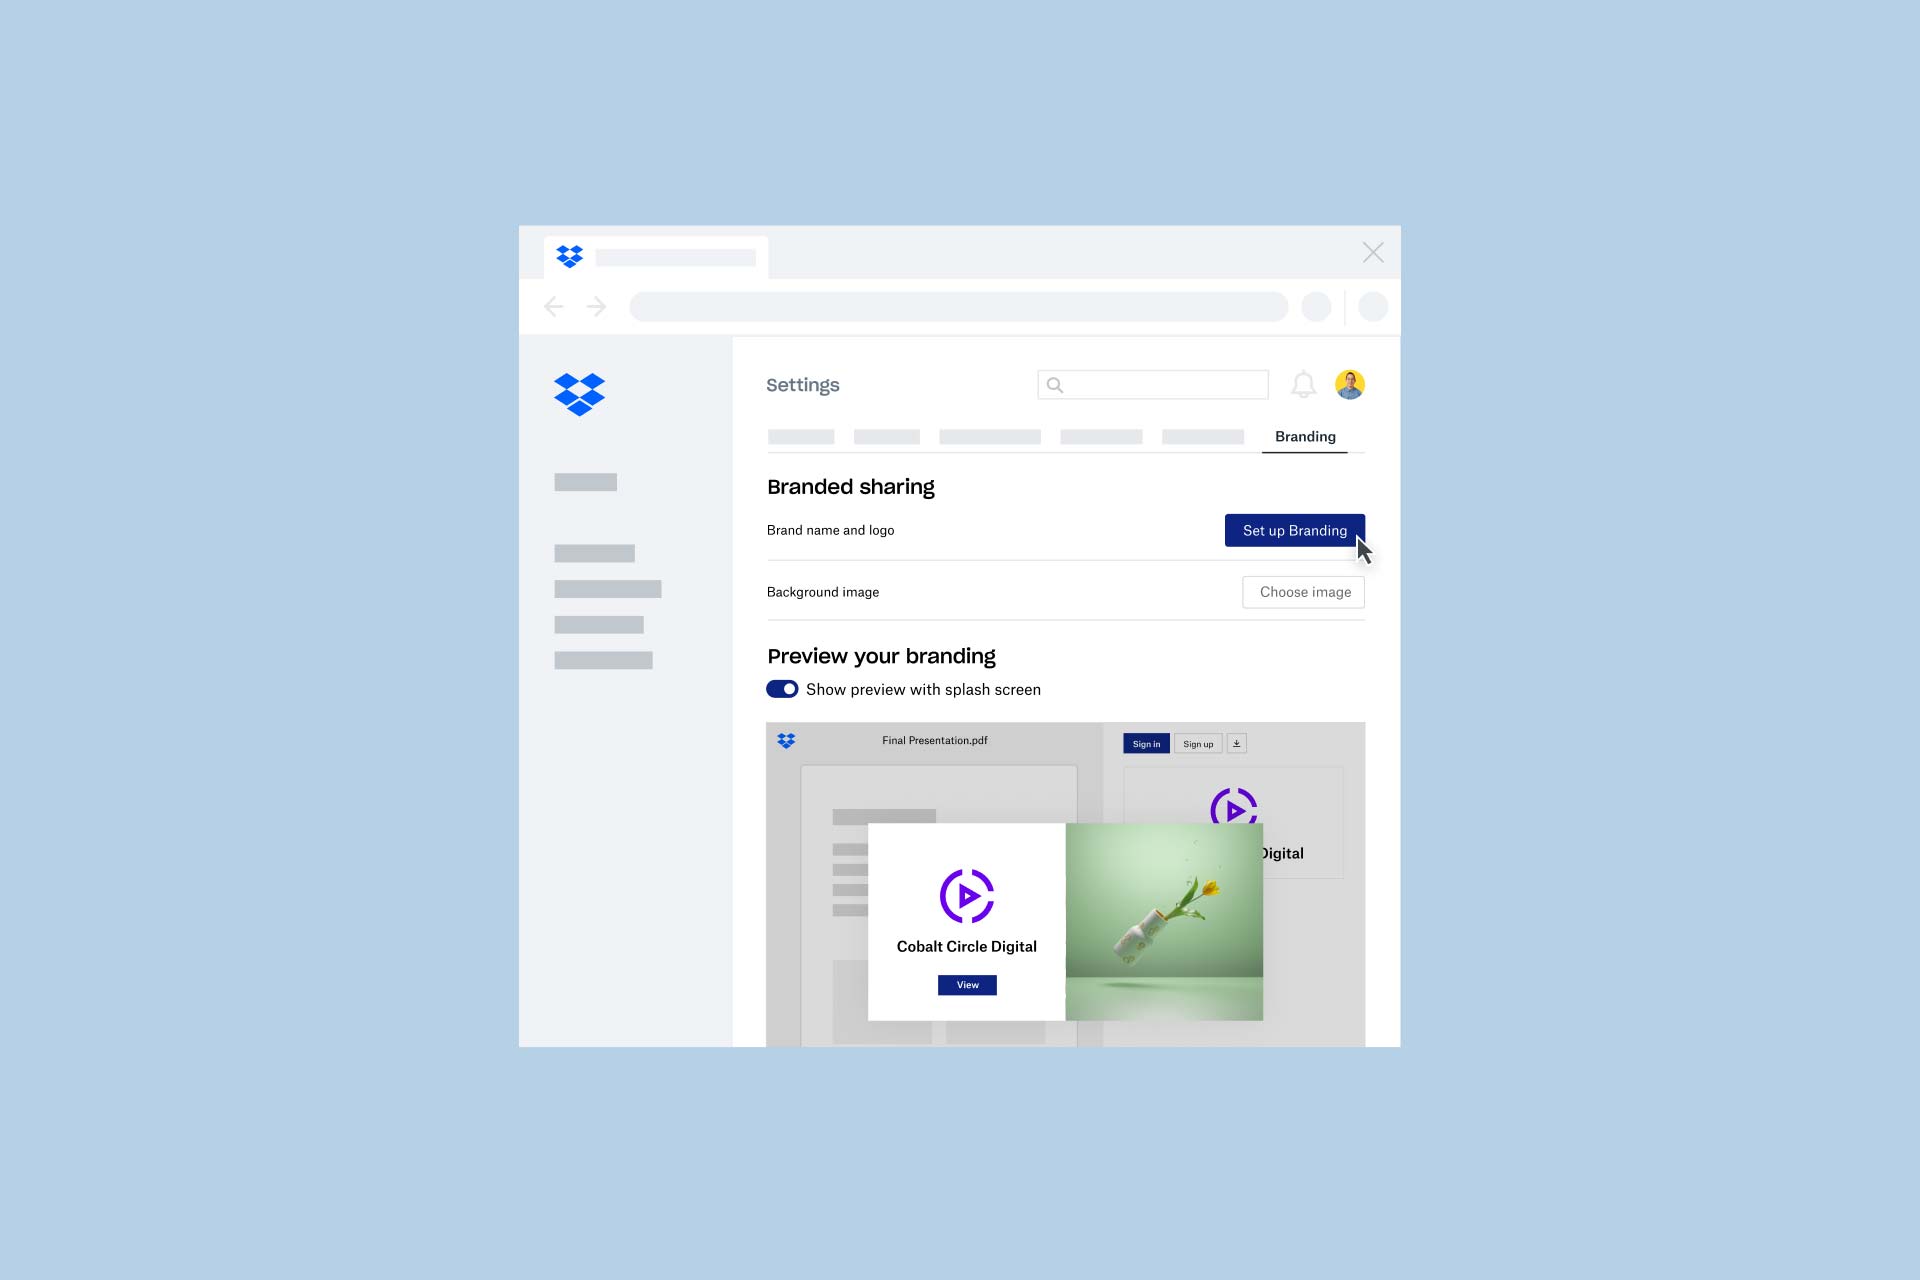 A preview of the branded sharing function in Dropbox